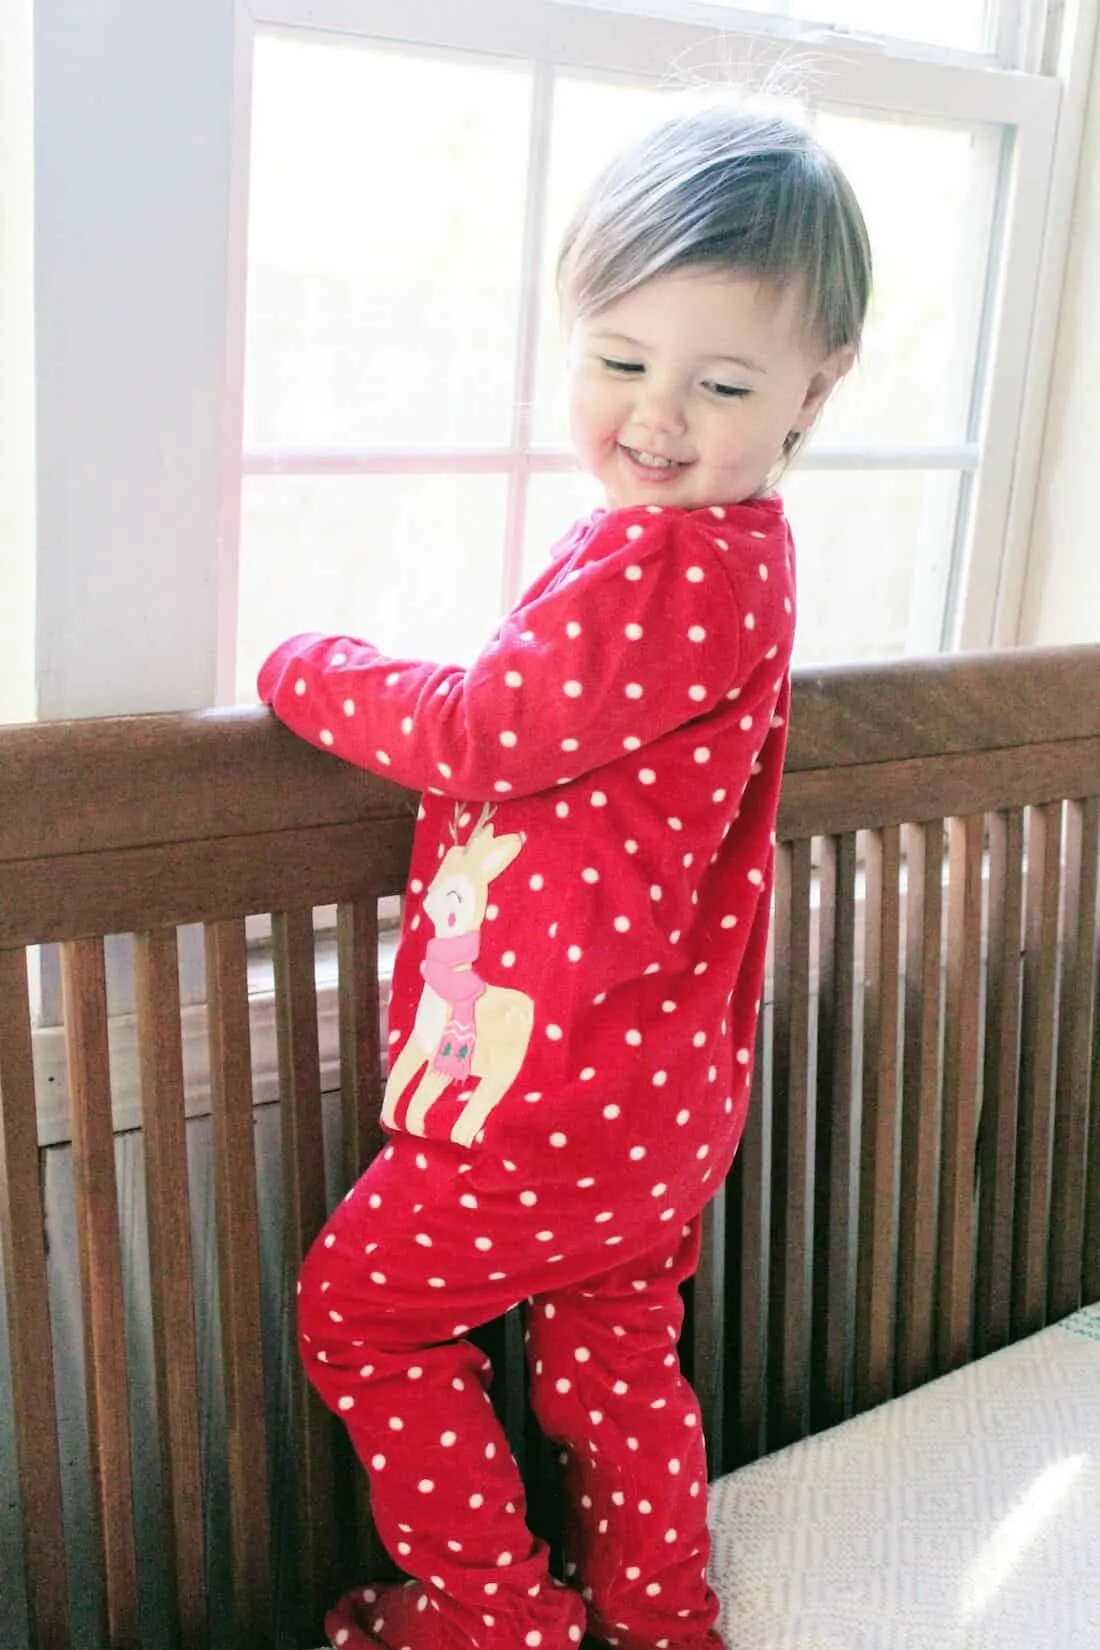 Toddler girl in Christmas pajamas stands in crib.